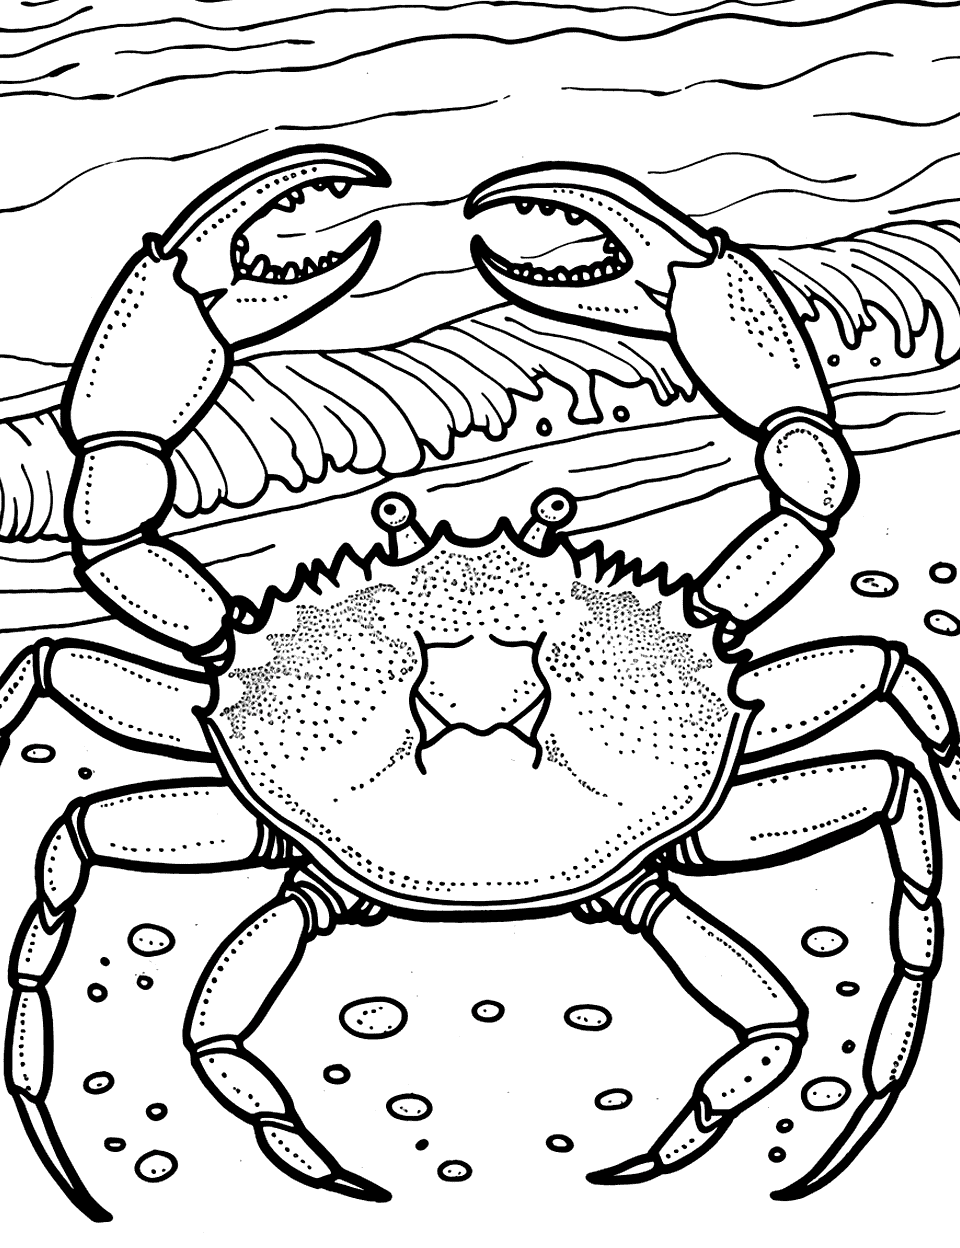 Crab Near Ocean Waves Coloring Page - A big, sturdy crab watching the ocean waves crash onto the sandy beach.